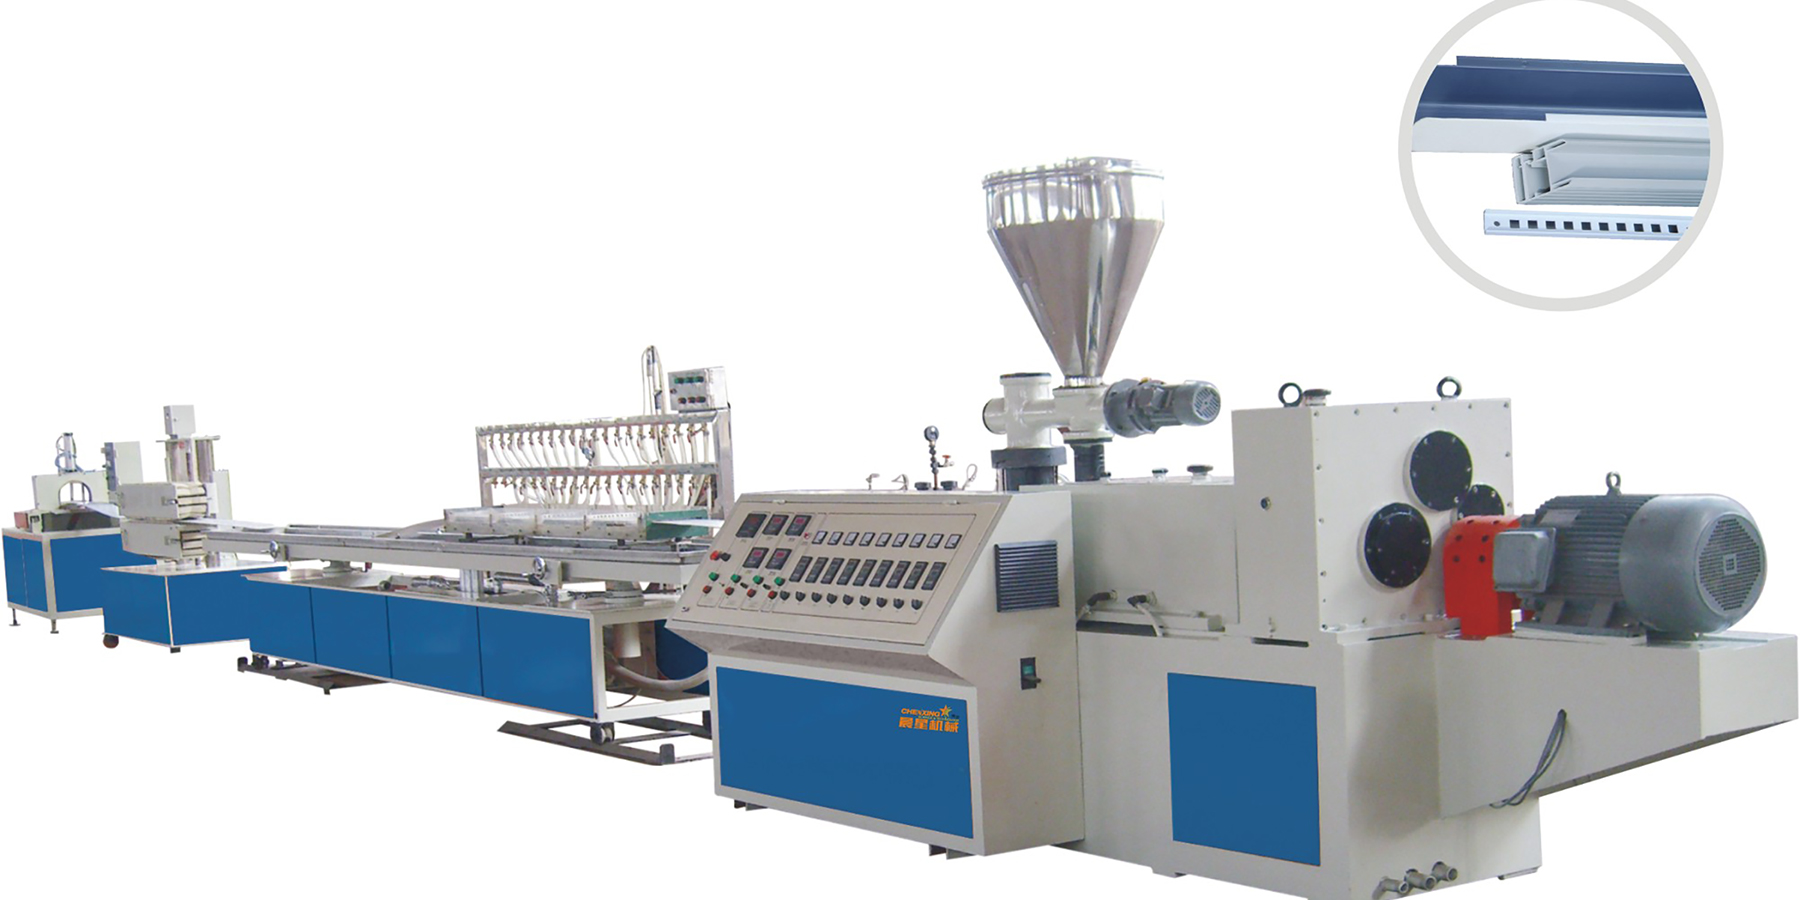 Extrusion Production Line for PVC Profiles